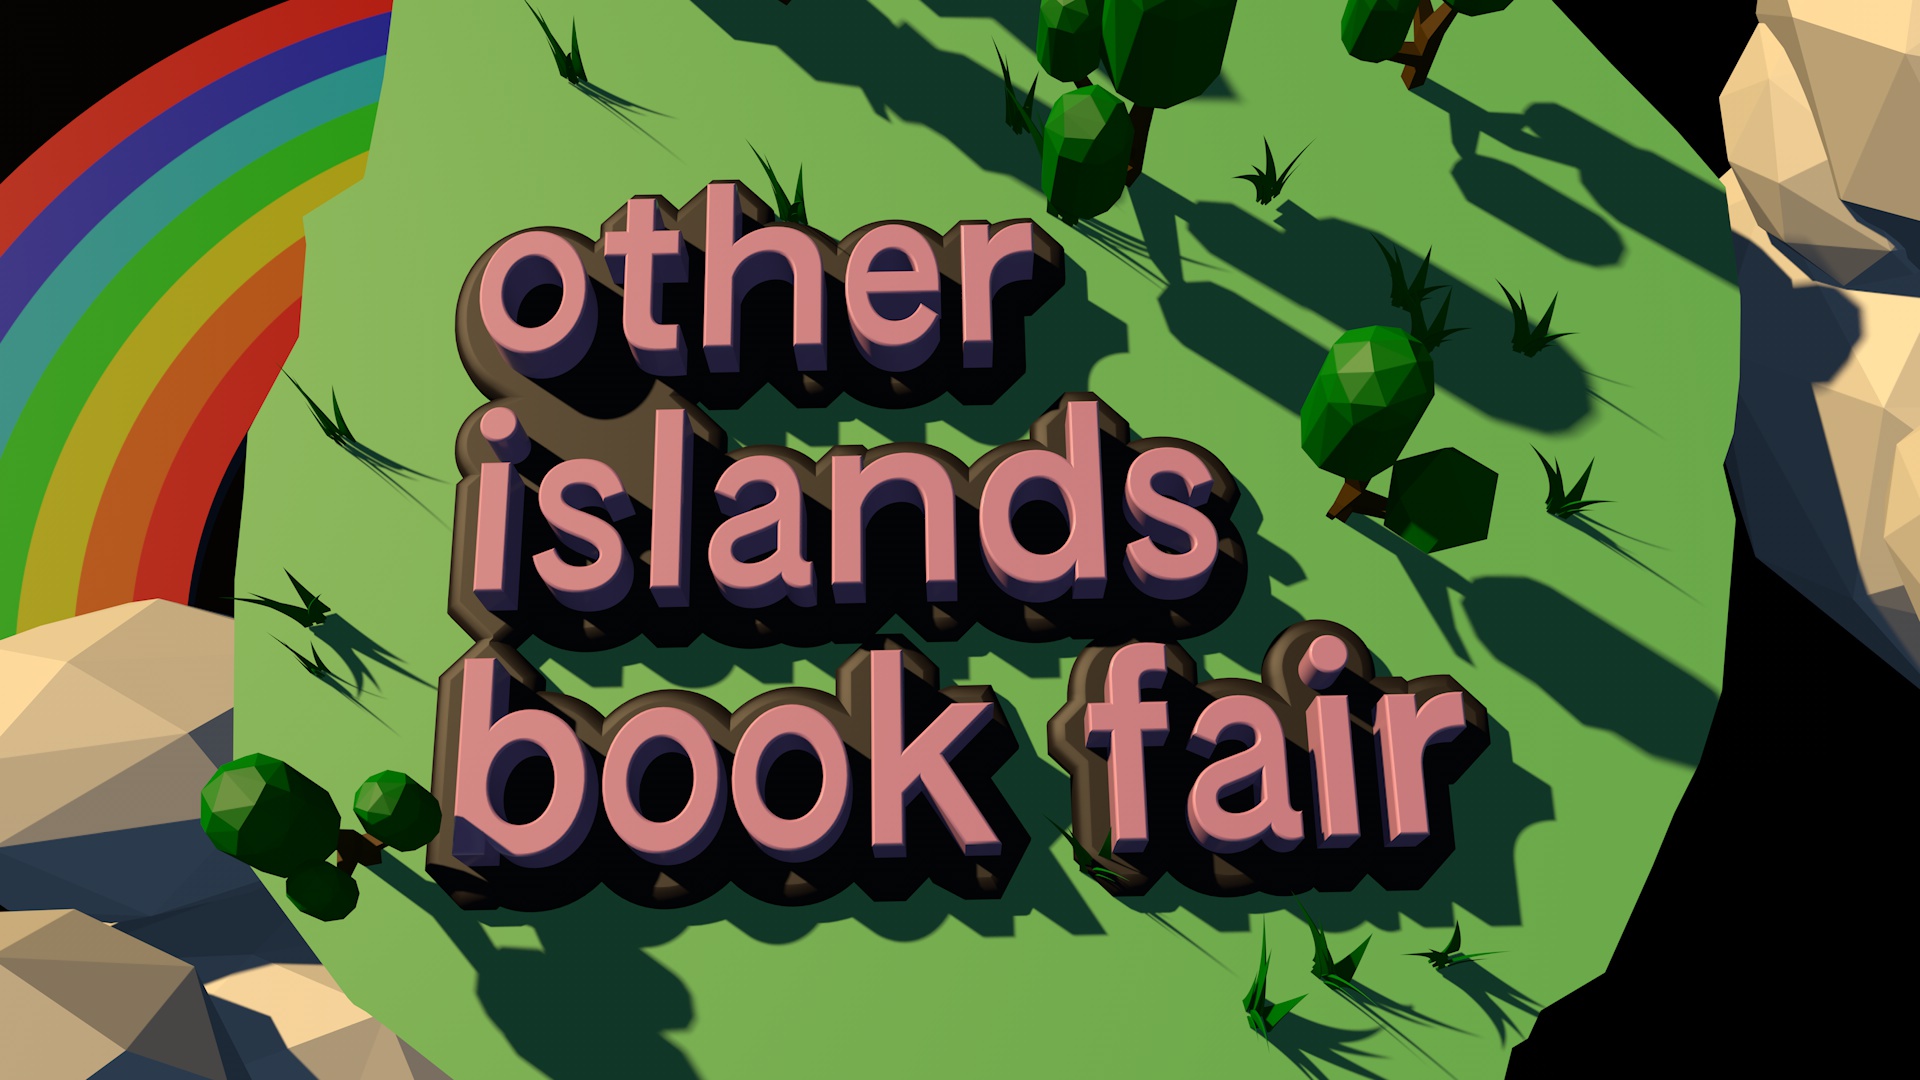 An illustration of a green landmass with trees on it. A rainbow is behind it. There are the words, other islands book fair, on top of the image.